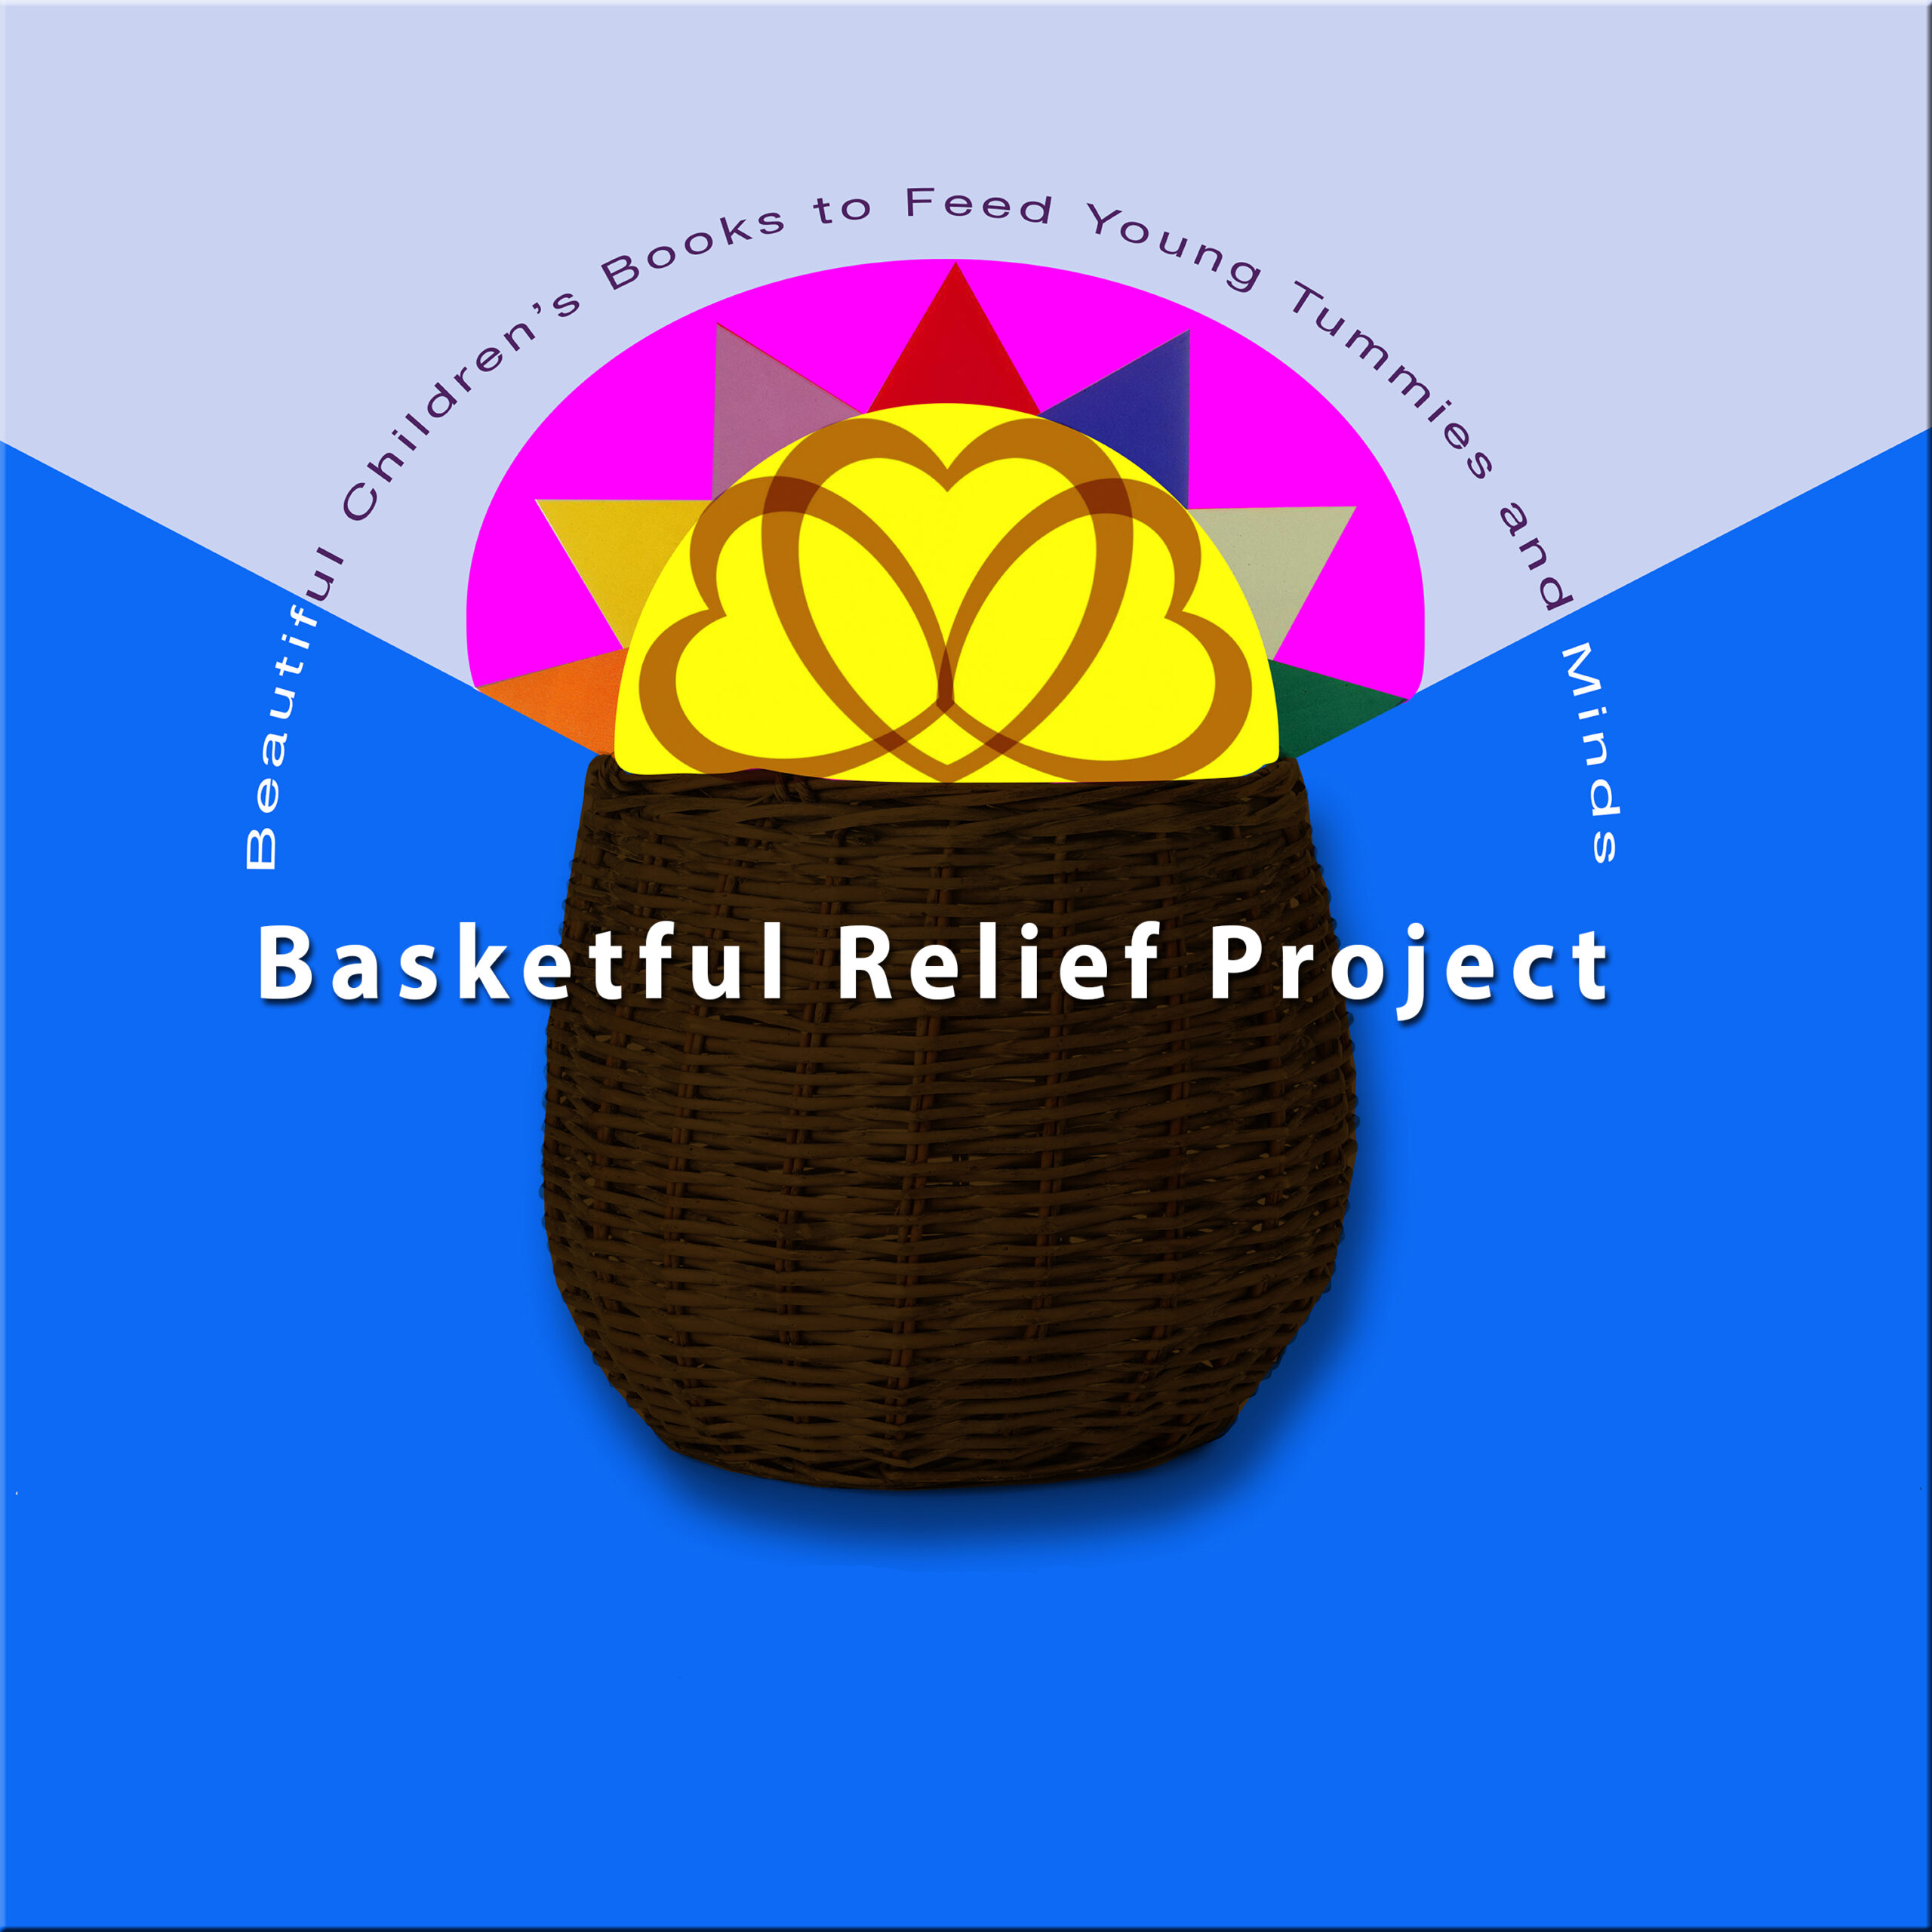 Basketful Relief Project